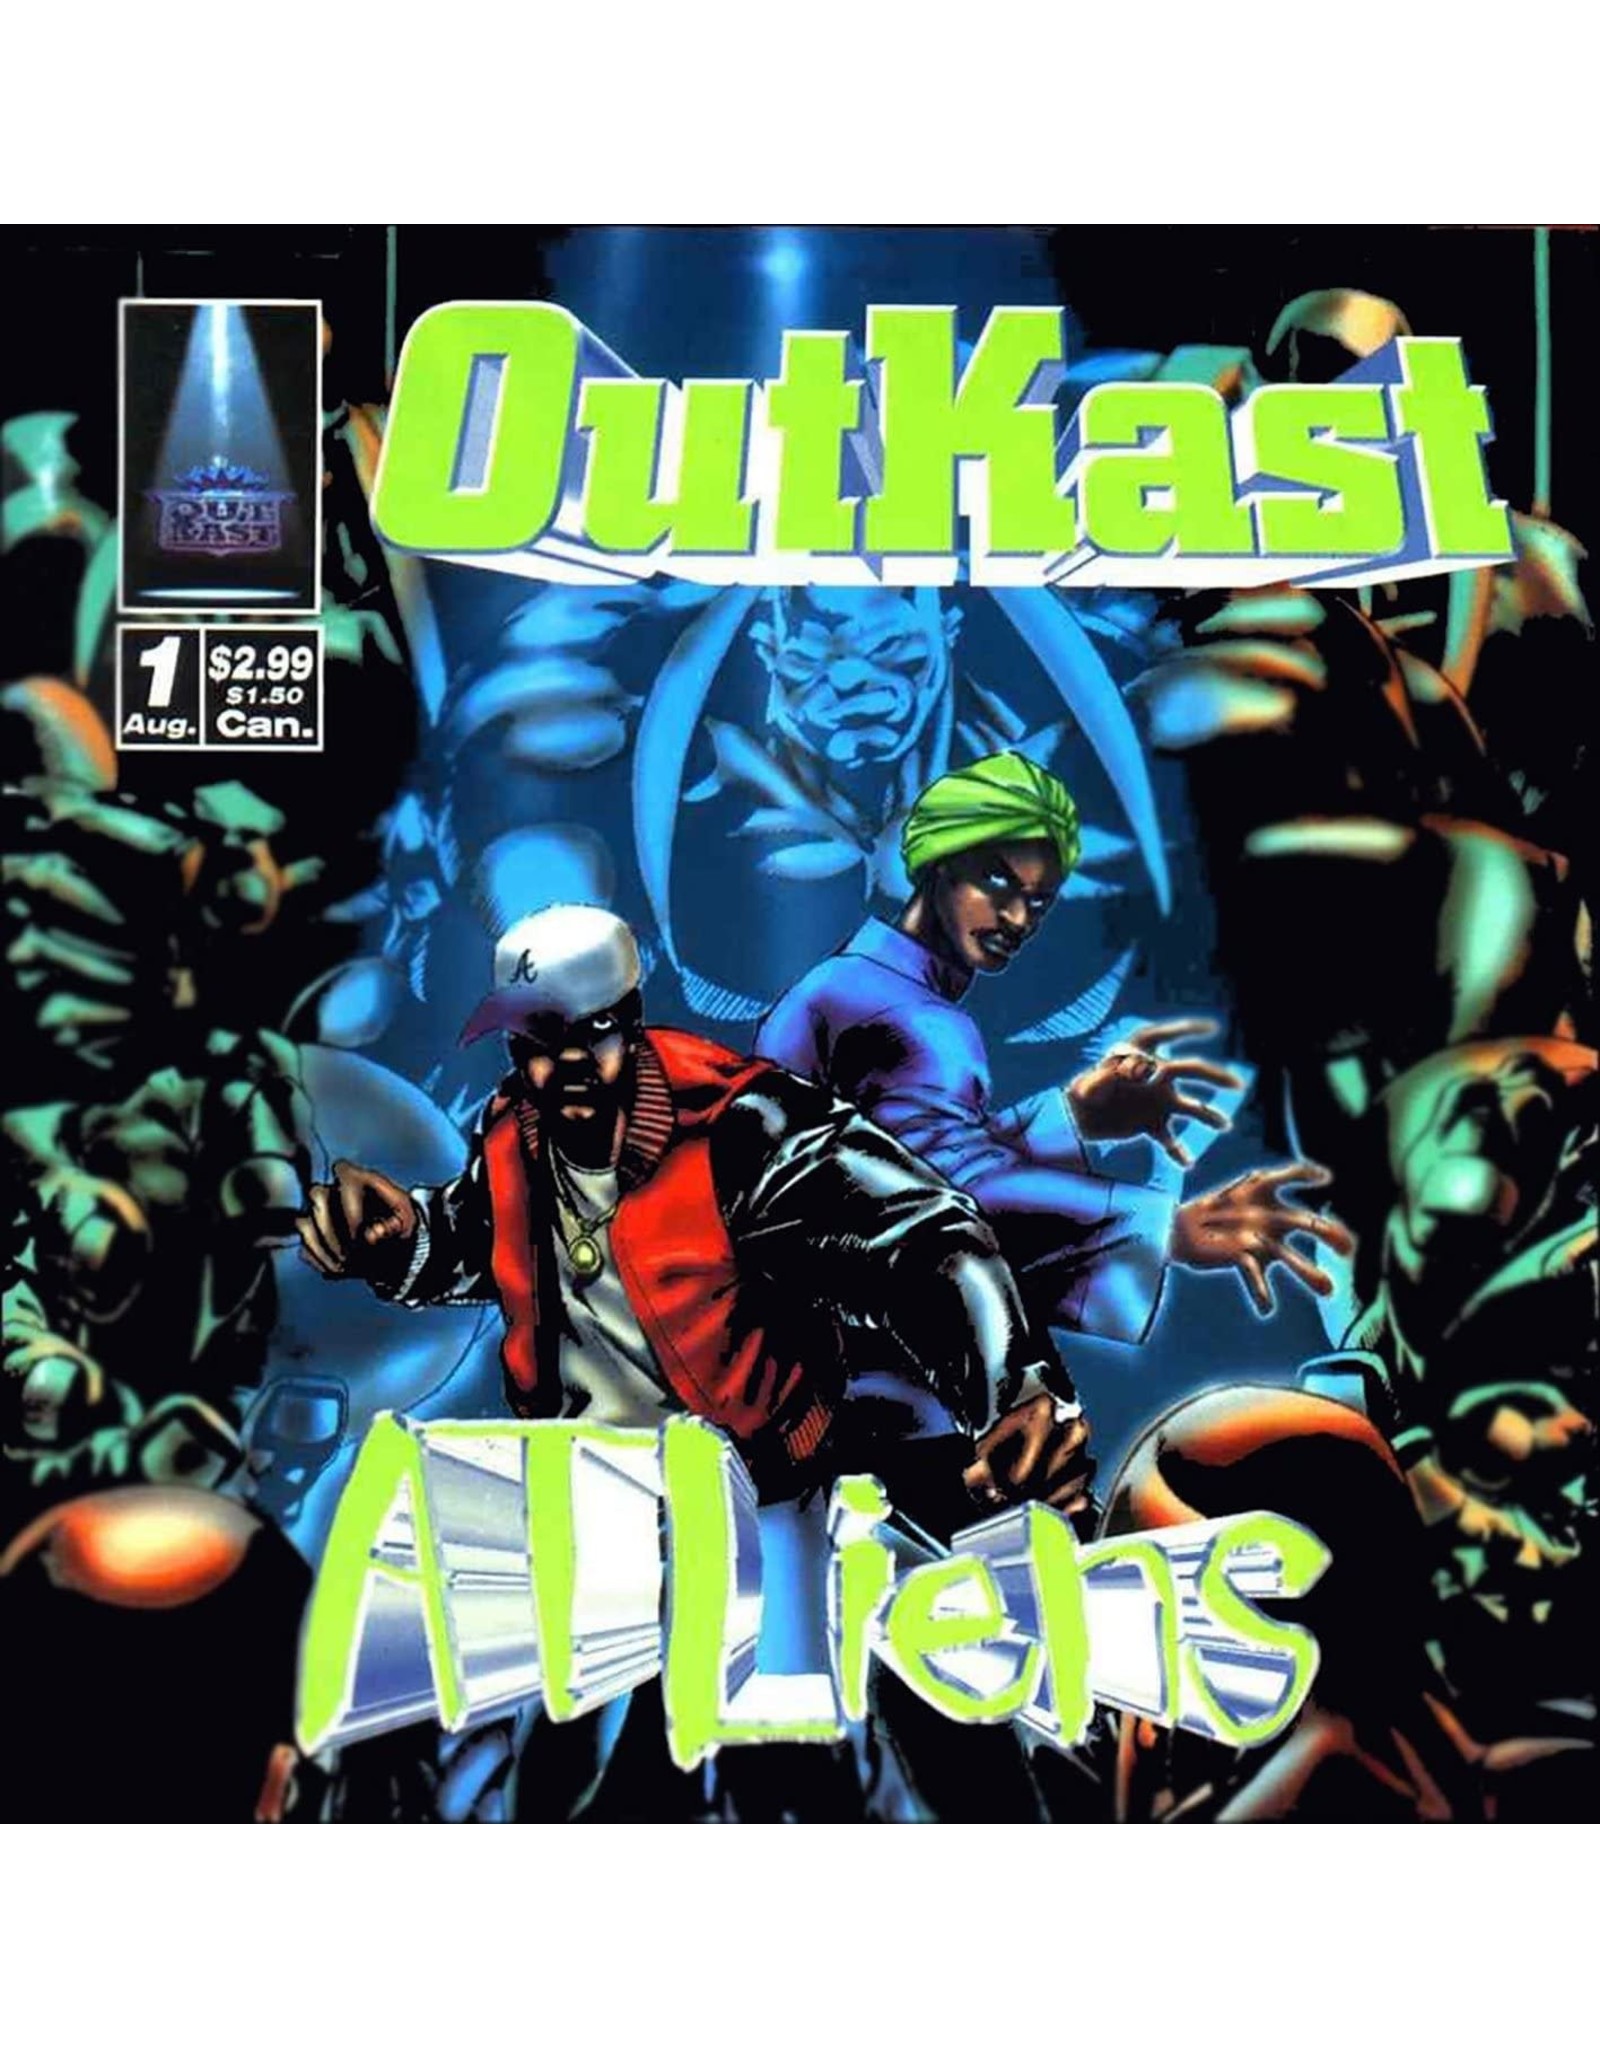 OutKast - ATLiens (25th Anniversary) [Expanded 4LP Edition]